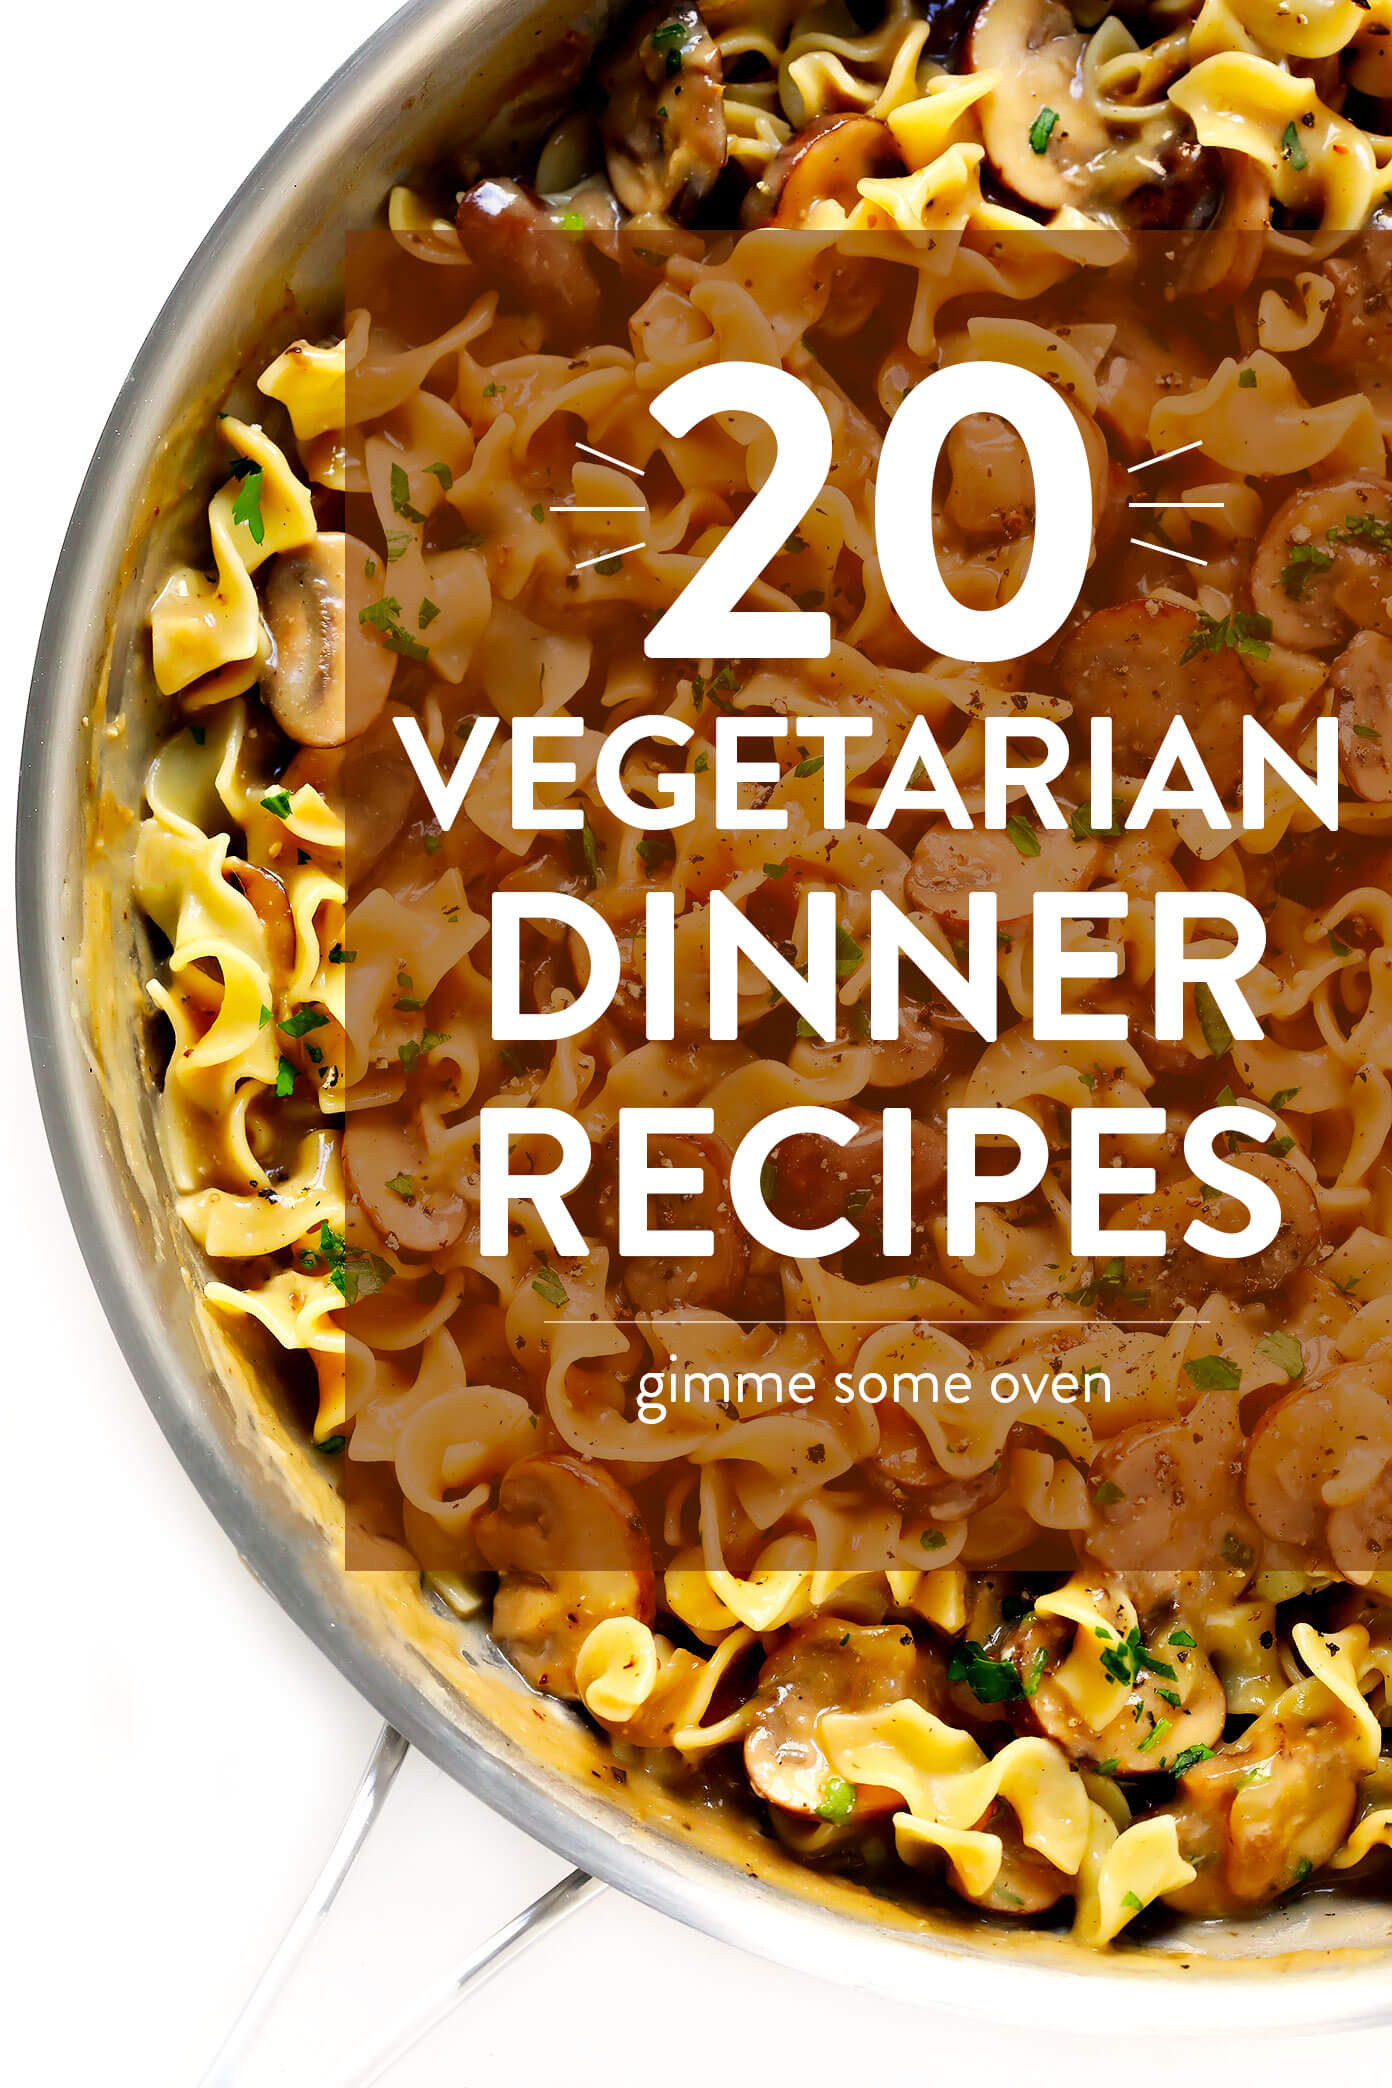 Healthy Vegetarian Dinner Ideas
 20 Ve arian Dinner Recipes That Everyone Will LOVE